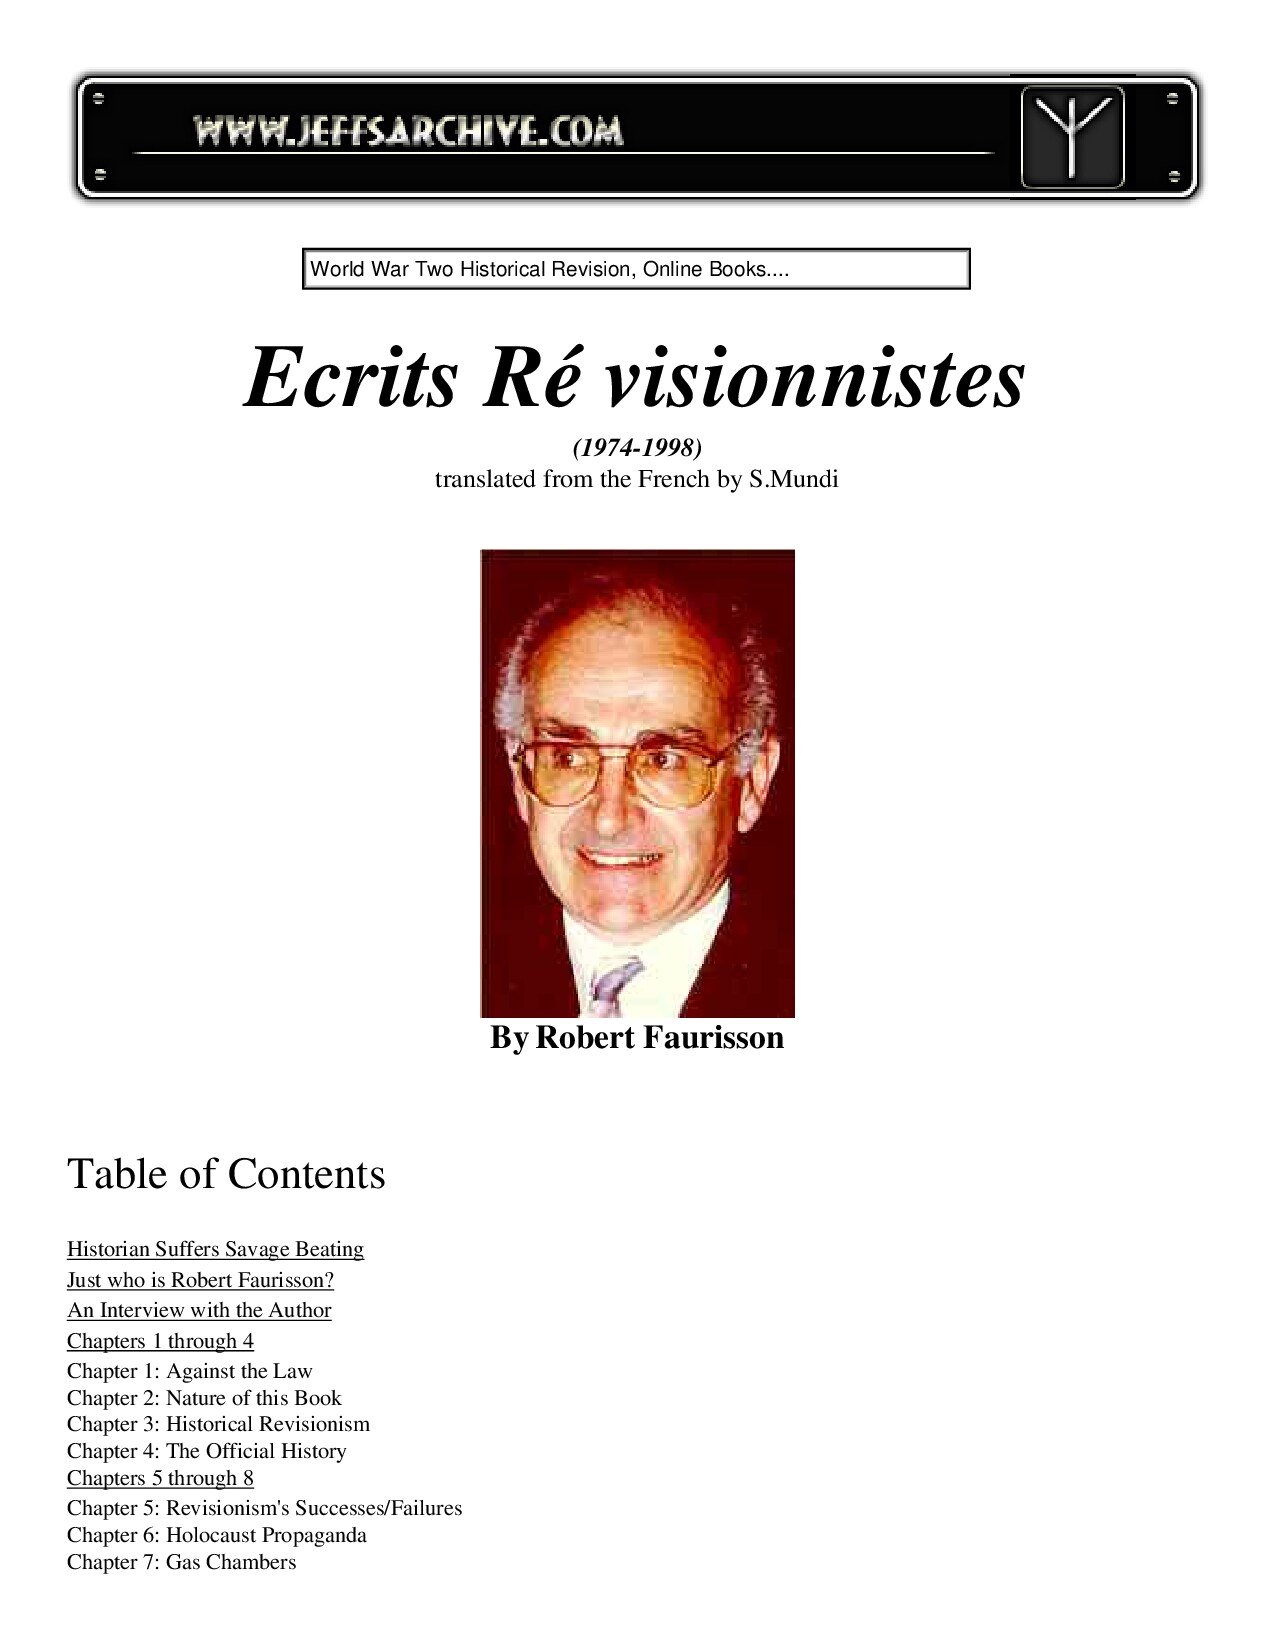 Robert Faurisson, Ecrits Re'visionnistes, Table of Contents